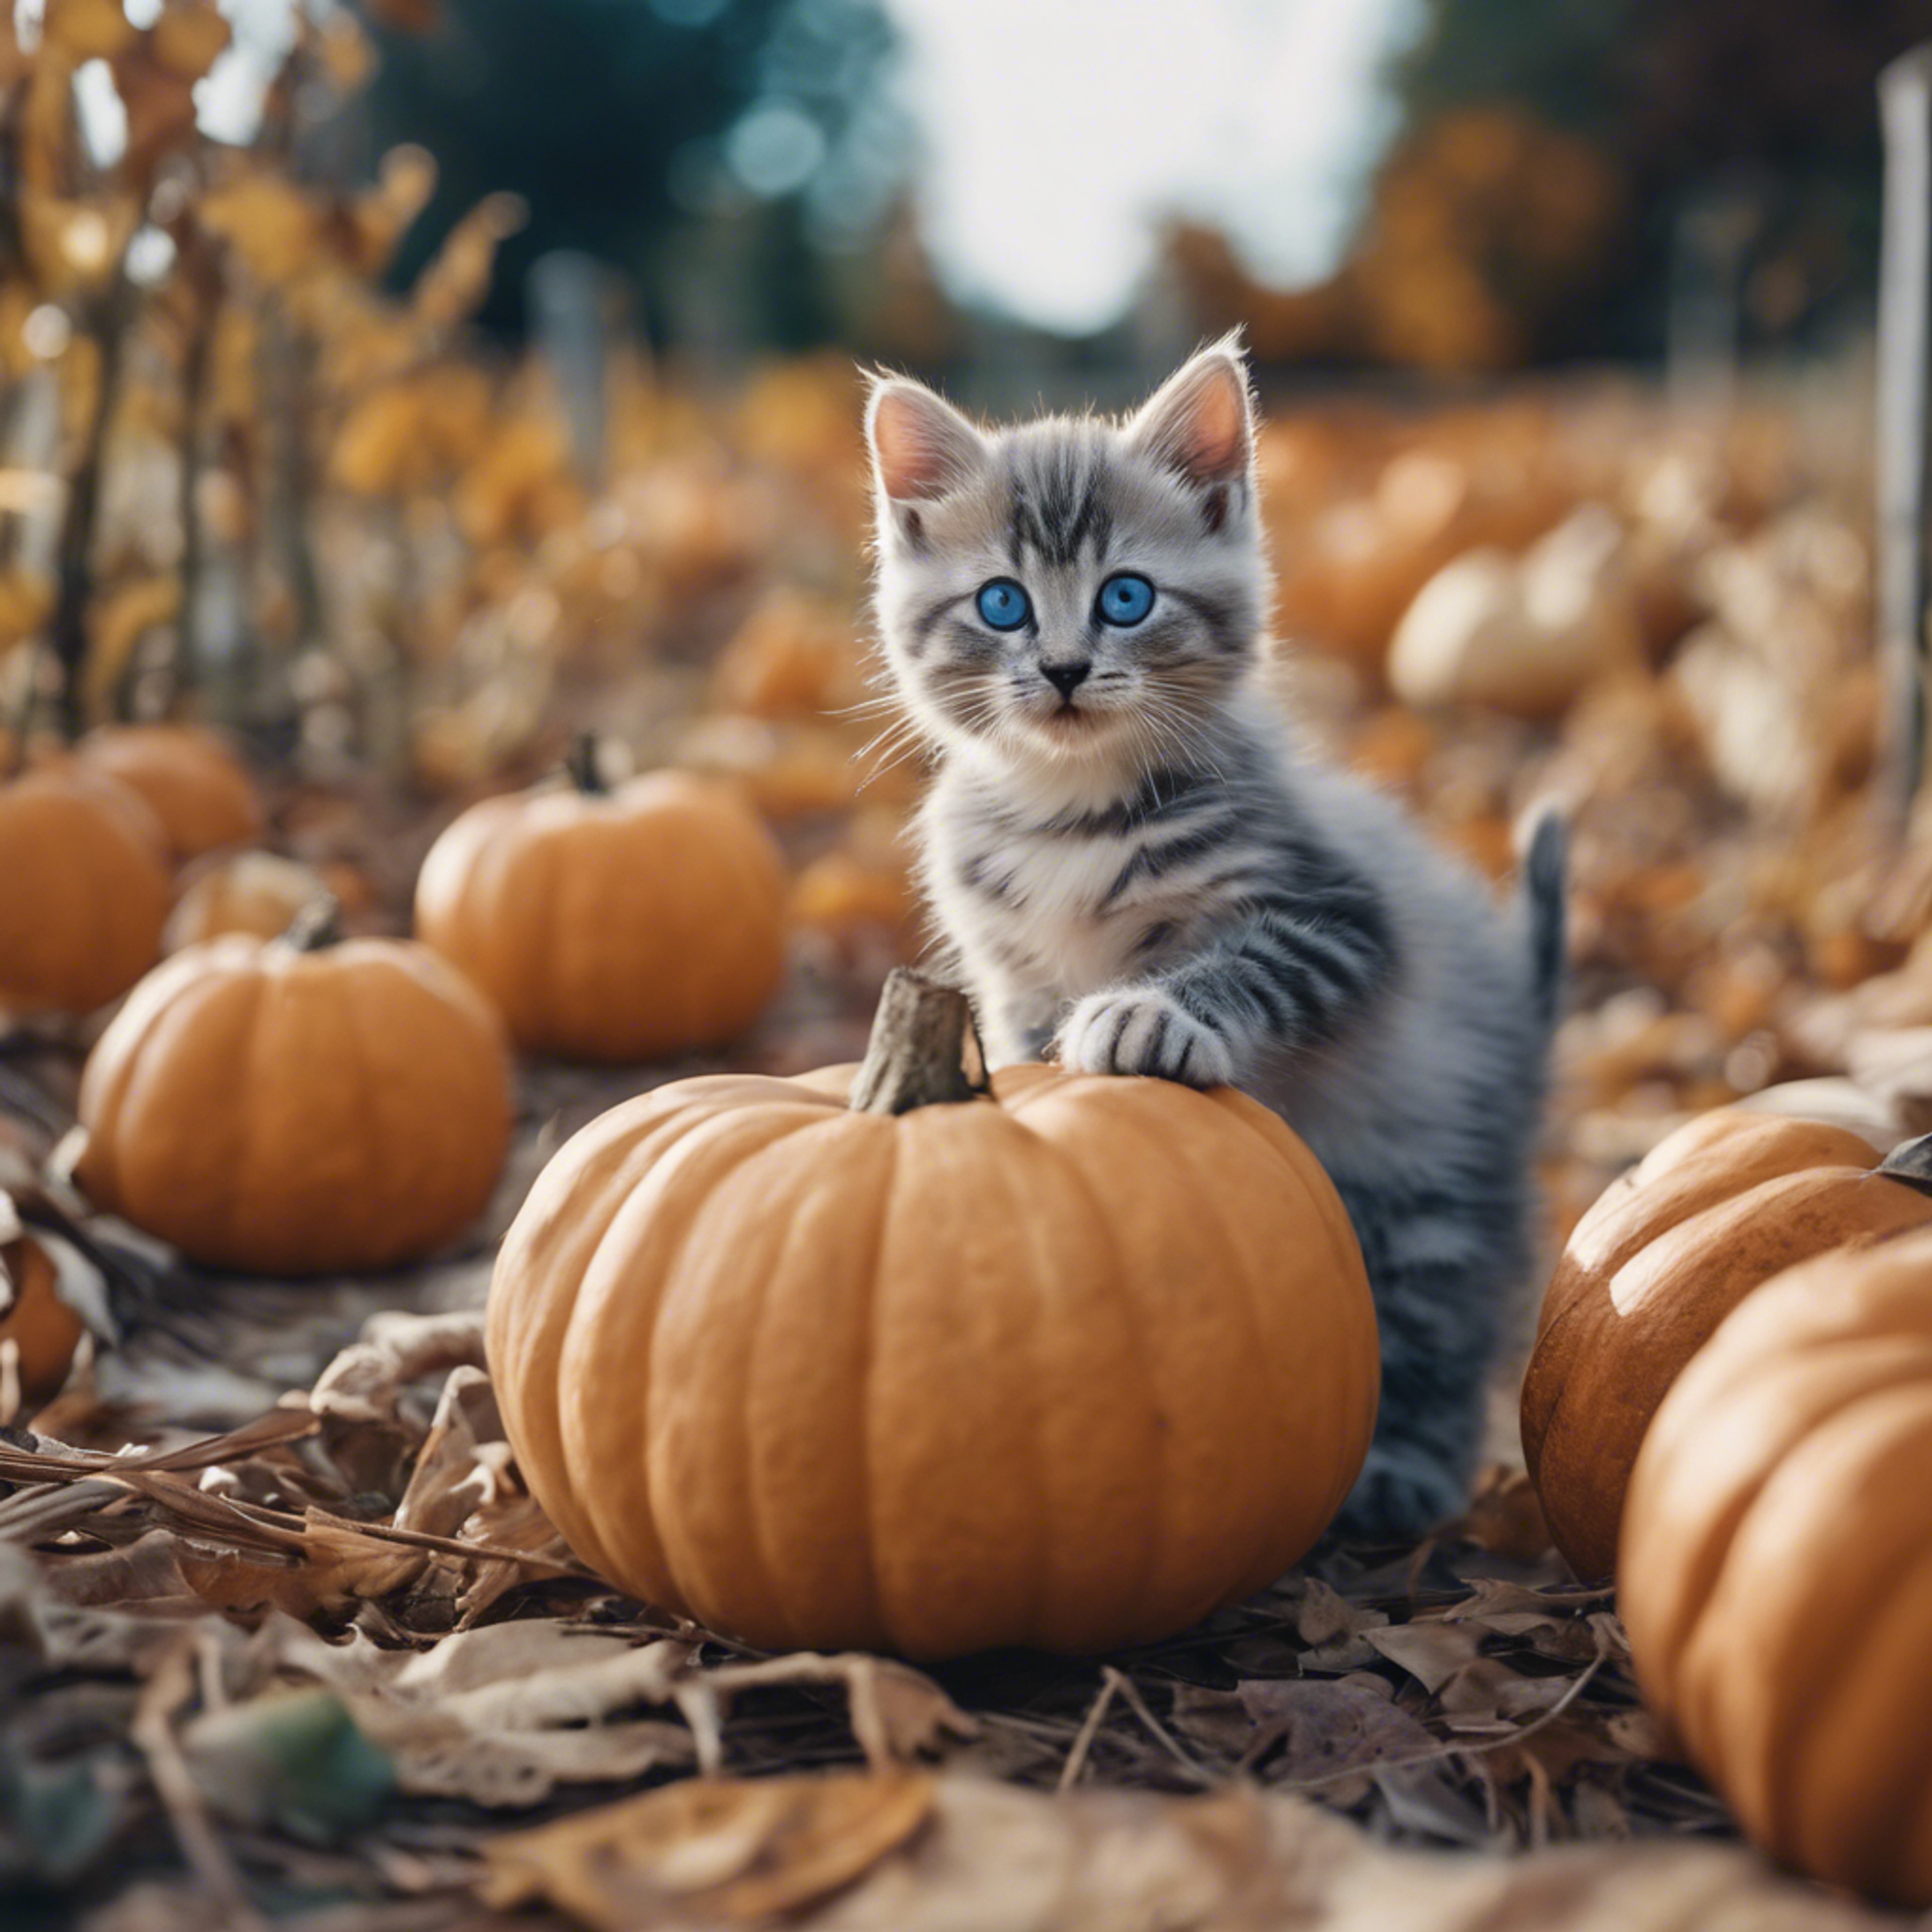 A small blue-eyed Cheetoh kitten exploring a pumpkin patch on an invitingly cool fall day. Валлпапер[ee8fc80847a940e288a7]